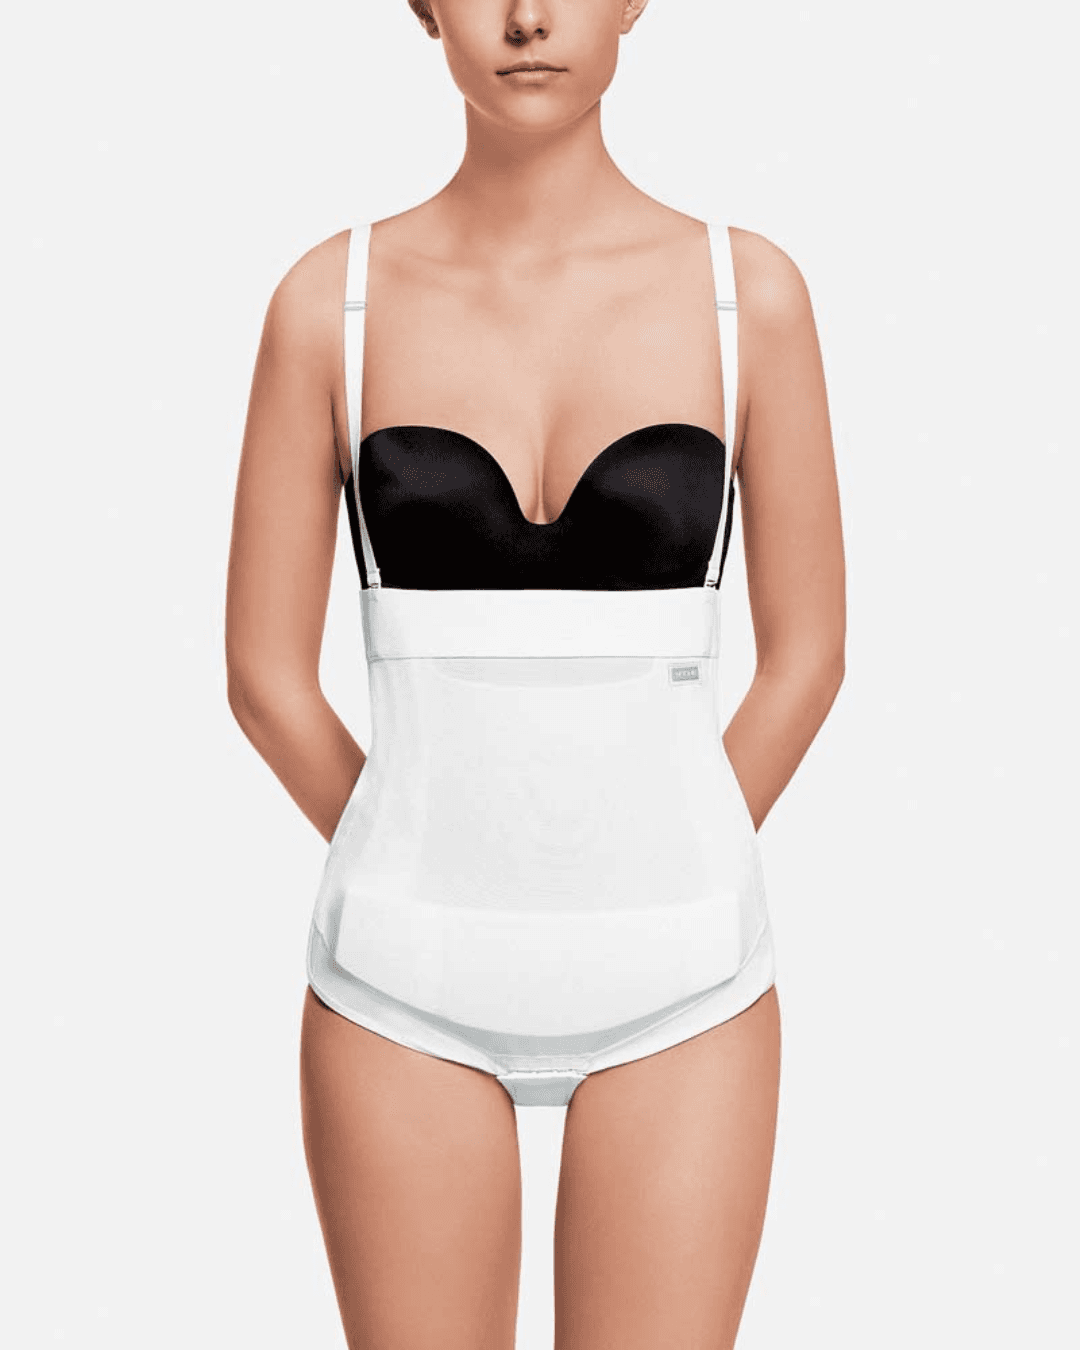 Image of Recova tummy tuck female supporter with adjustable Velcro side openings. This post-surgery garment provides optimal compression through double skin reinforcements. It includes a unique pocket with a removable foam insert for targeted scar area compression. With detachable and adjustable shoulder straps, flat seams, and compatibility with EPI-FOAM Pads, it is ideal for abdominoplasty, pubic procedures, C-sections, or abdominal liposuction